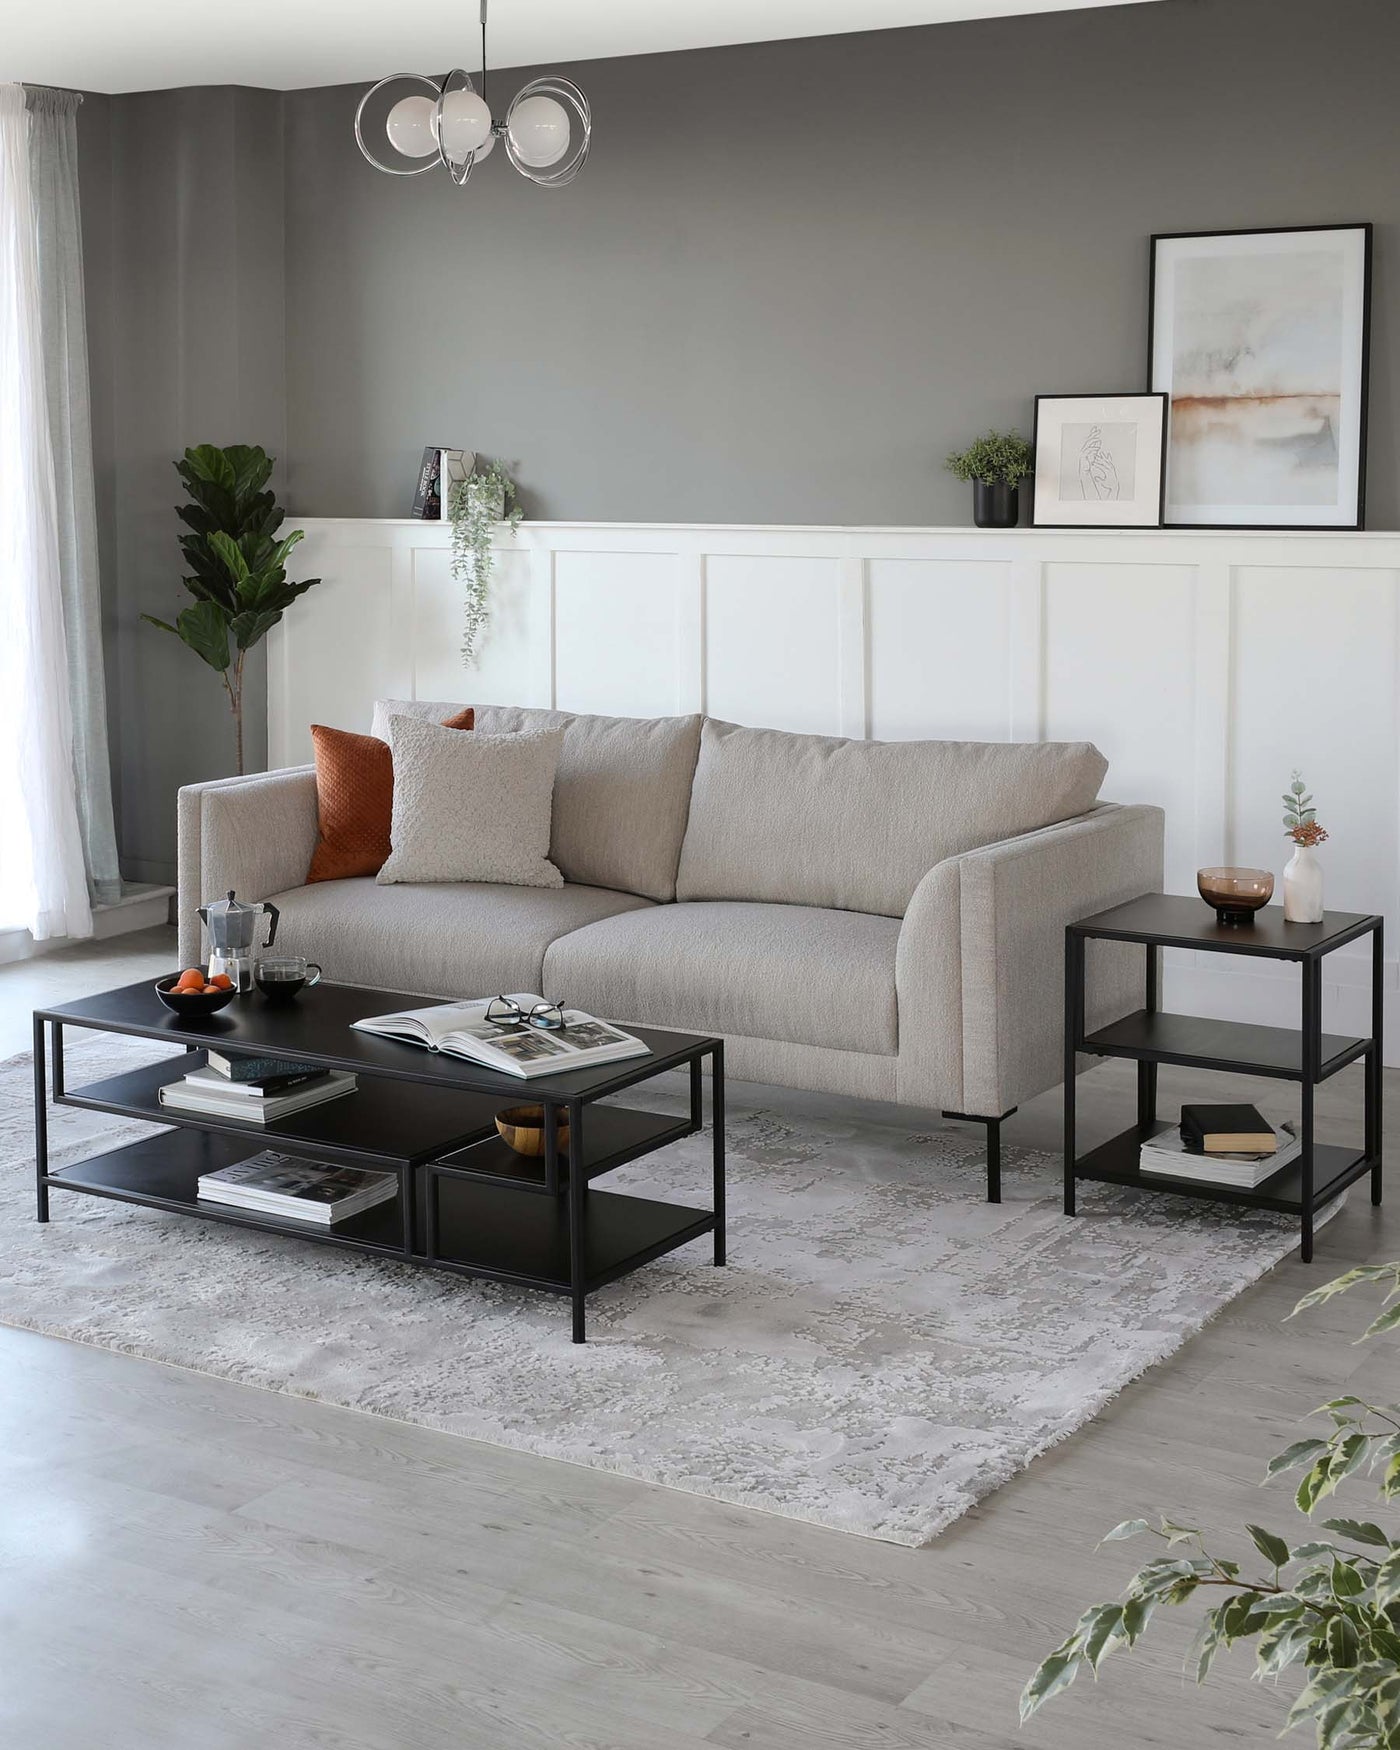 A contemporary living room setting featuring a textured fabric three-seater sofa in a light neutral colour, a large rectangular coffee table with a black metal frame and a dark wood finish top, complemented by dual lower shelves. Adjacent is a matching side table with a similar black metal frame and dual-tiered shelves, both featuring clean, modern lines. The furniture is arranged atop a soft, patterned area rug in muted tones, harmonizing with the room's modern yet cosy aesthetic.